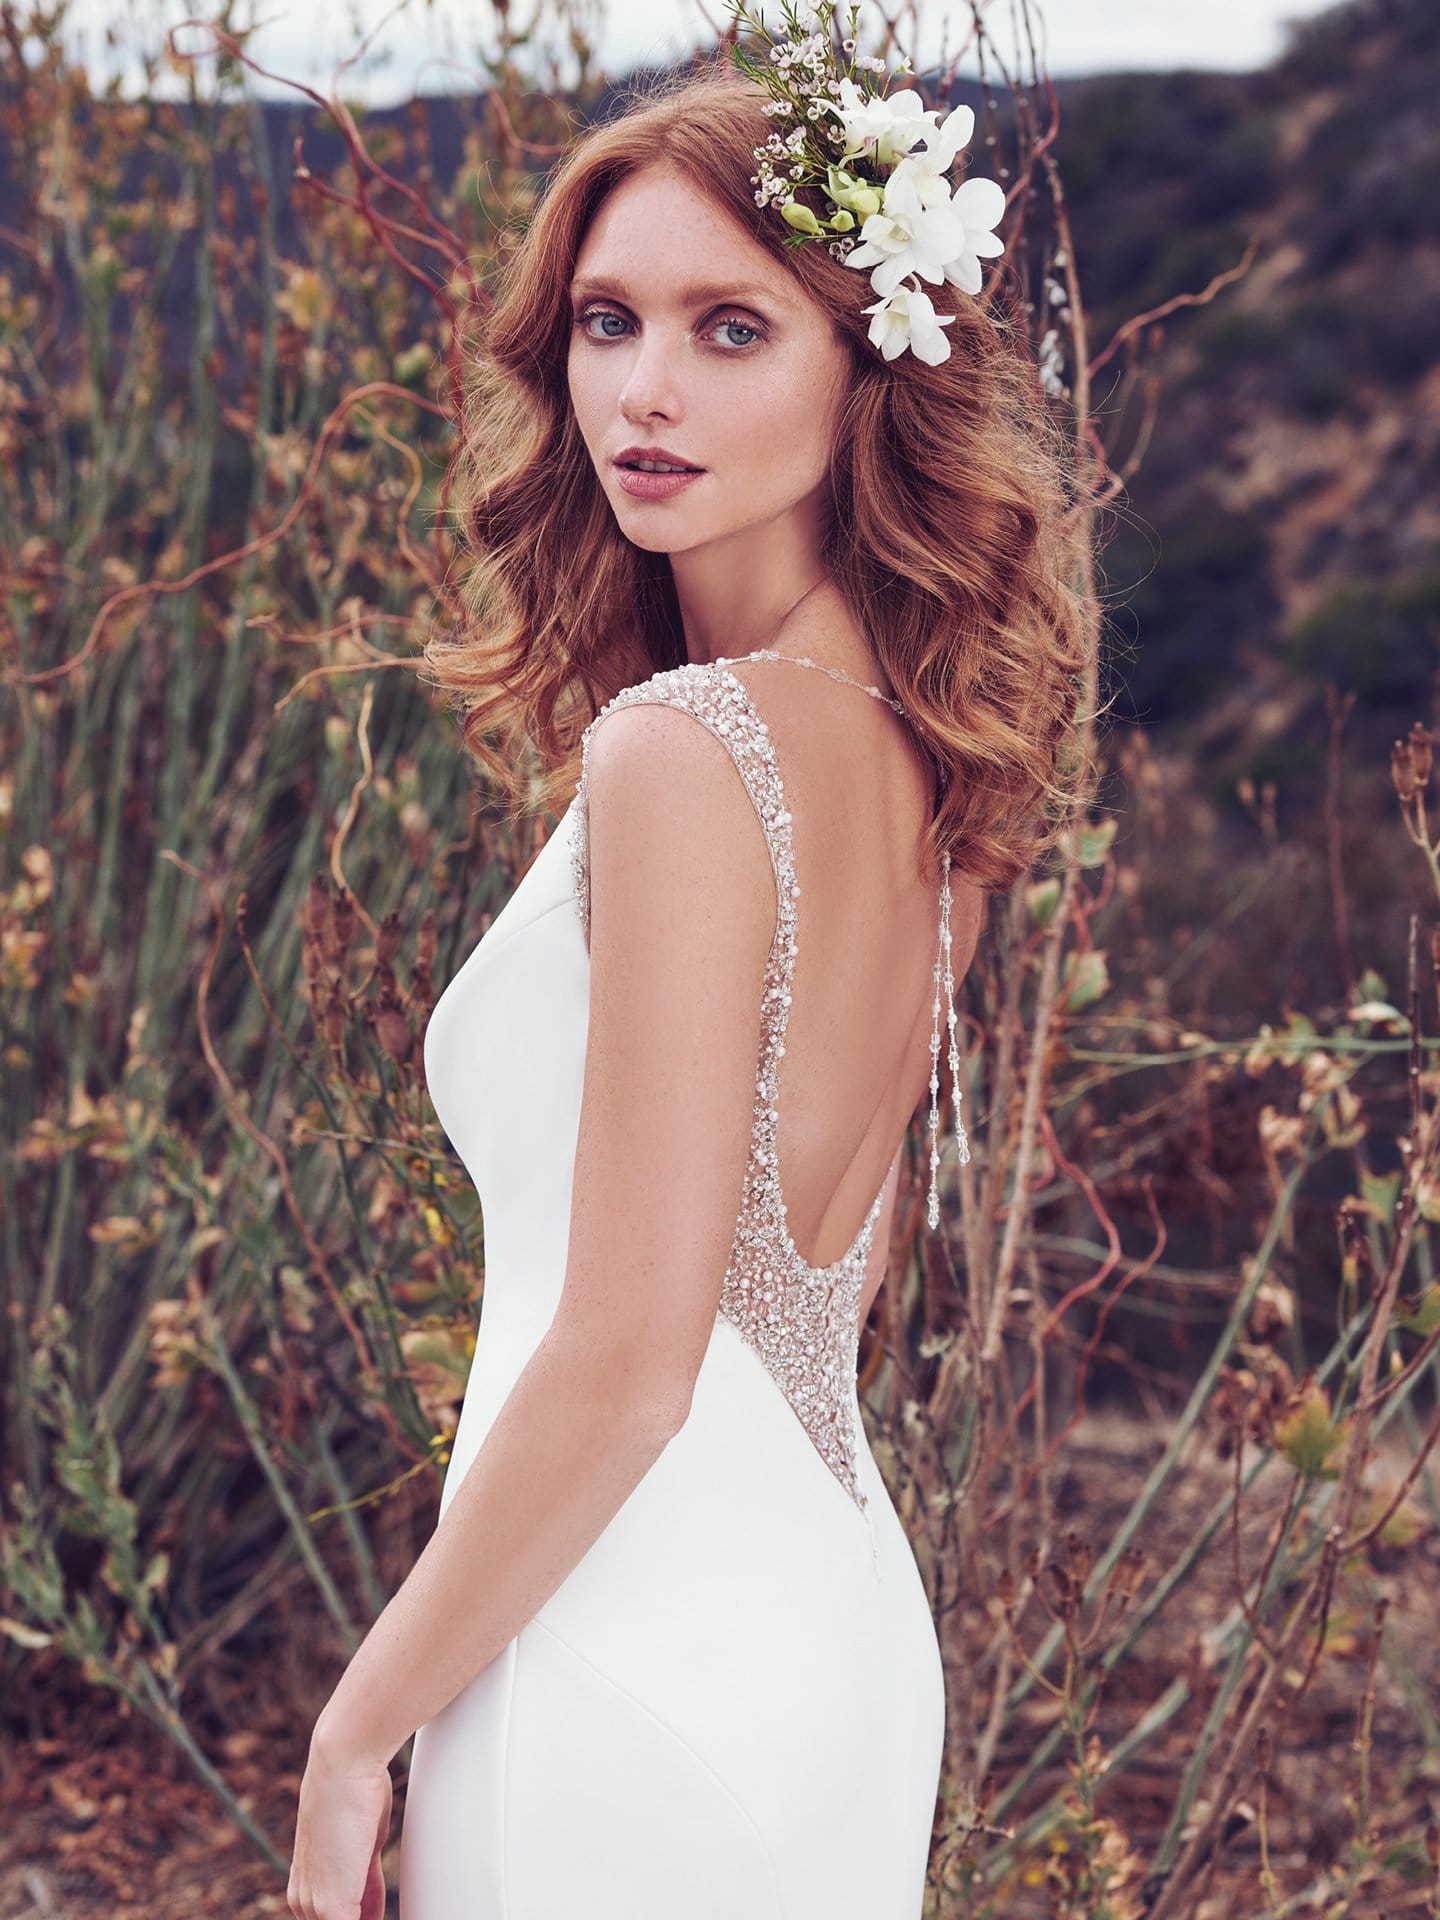 Beautiful statement-back wedding dresses from Maggie Sottero and Sottero and Midgley - Simple yet chic, this Aldora Satin wedding dress features illusion and Swarovski crystals accenting the shoulders, gliding into a shimmering ribbon of pearls and beading that ties in the plunging back, also trimmed in illusion and Swarovski crystals. Evangelina by Maggie Sottero.